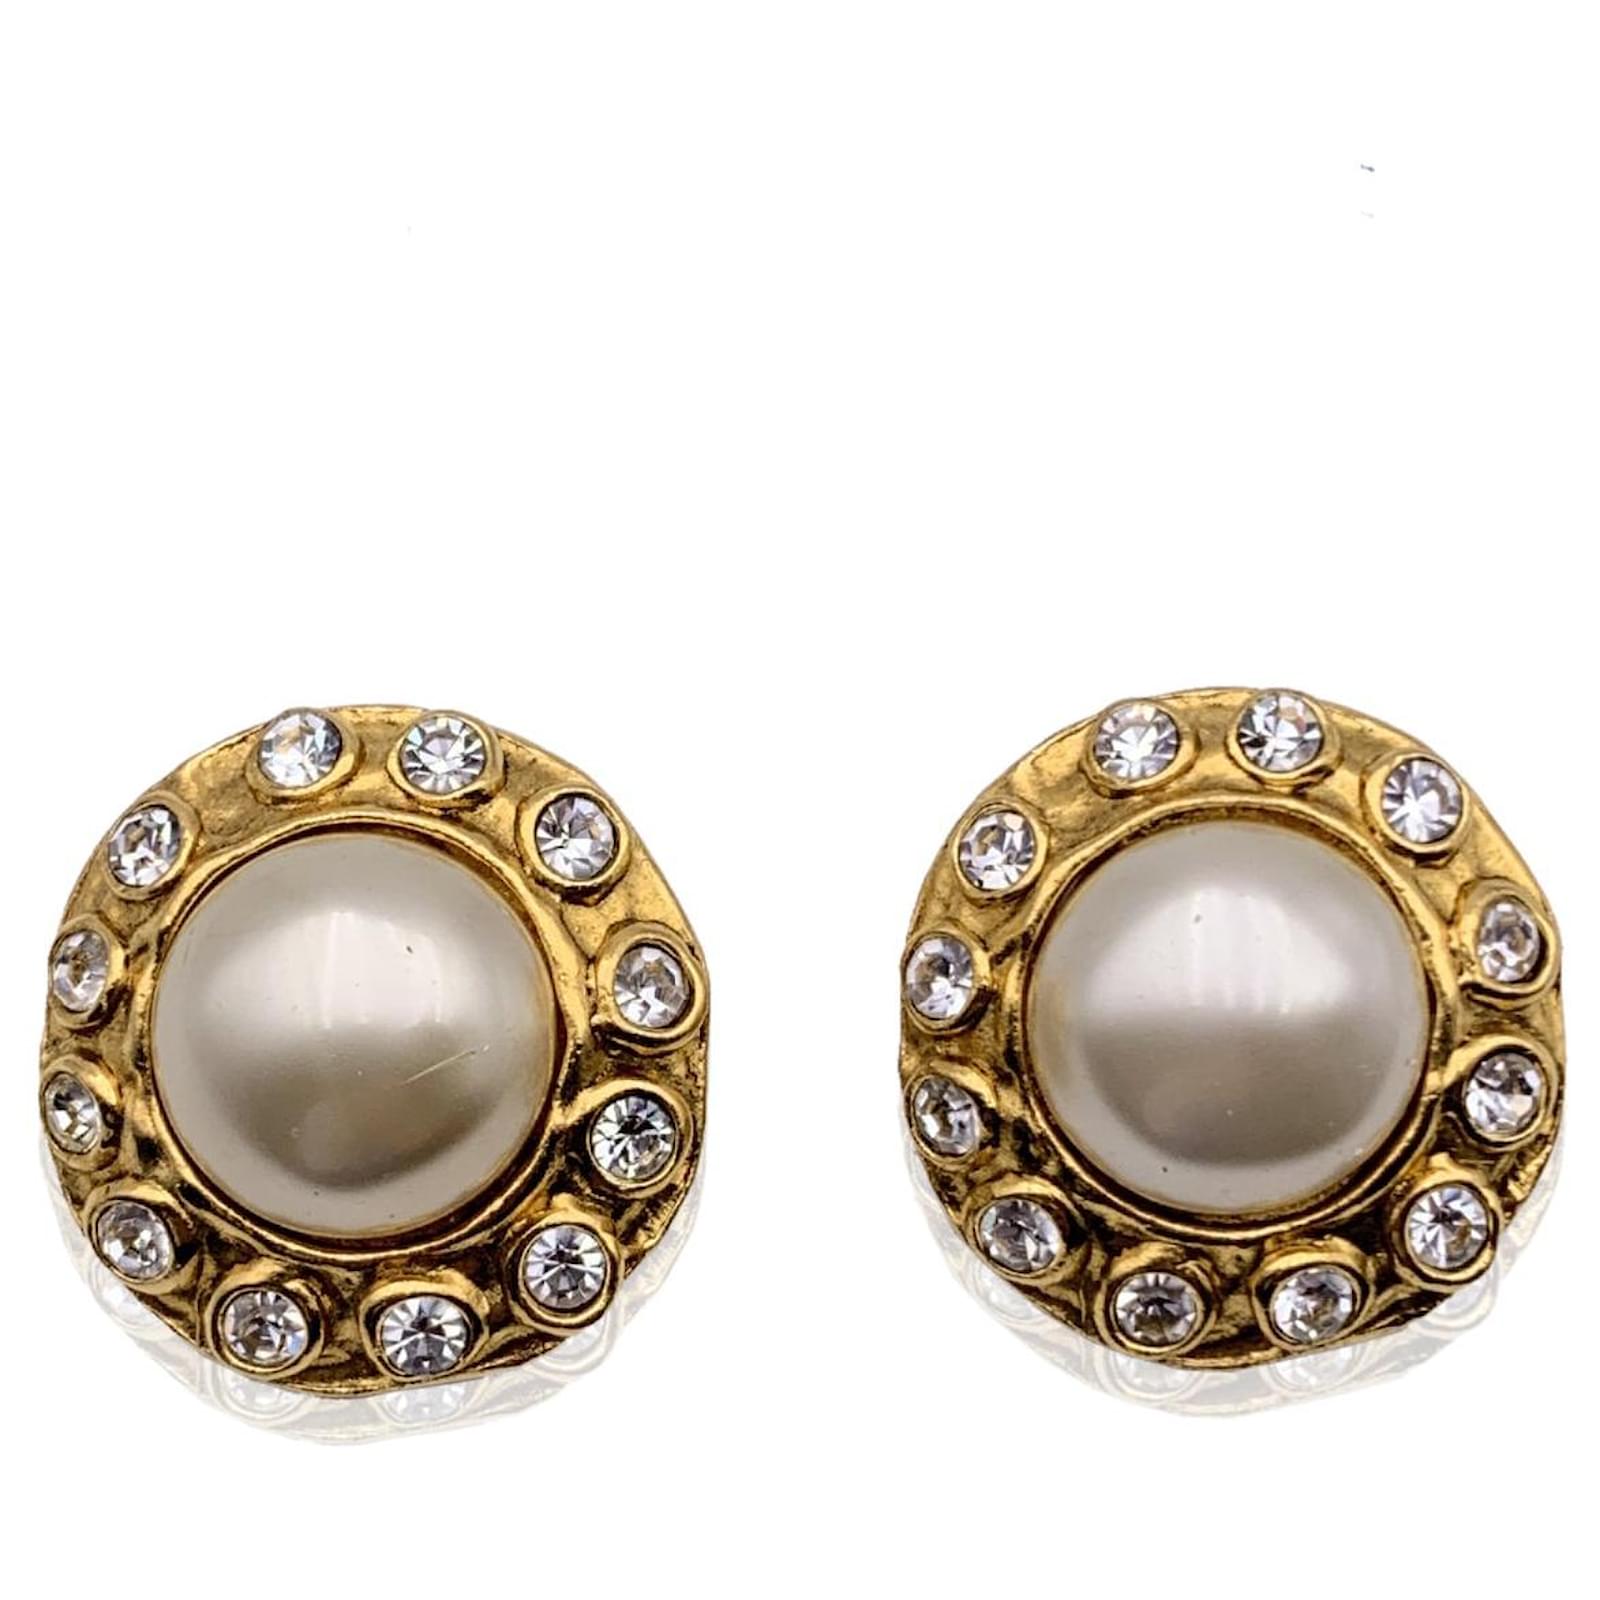 Sold at Auction: PR CHANEL VINTAGE PEARL, CRYSTAL LOGO CC EARRINGS